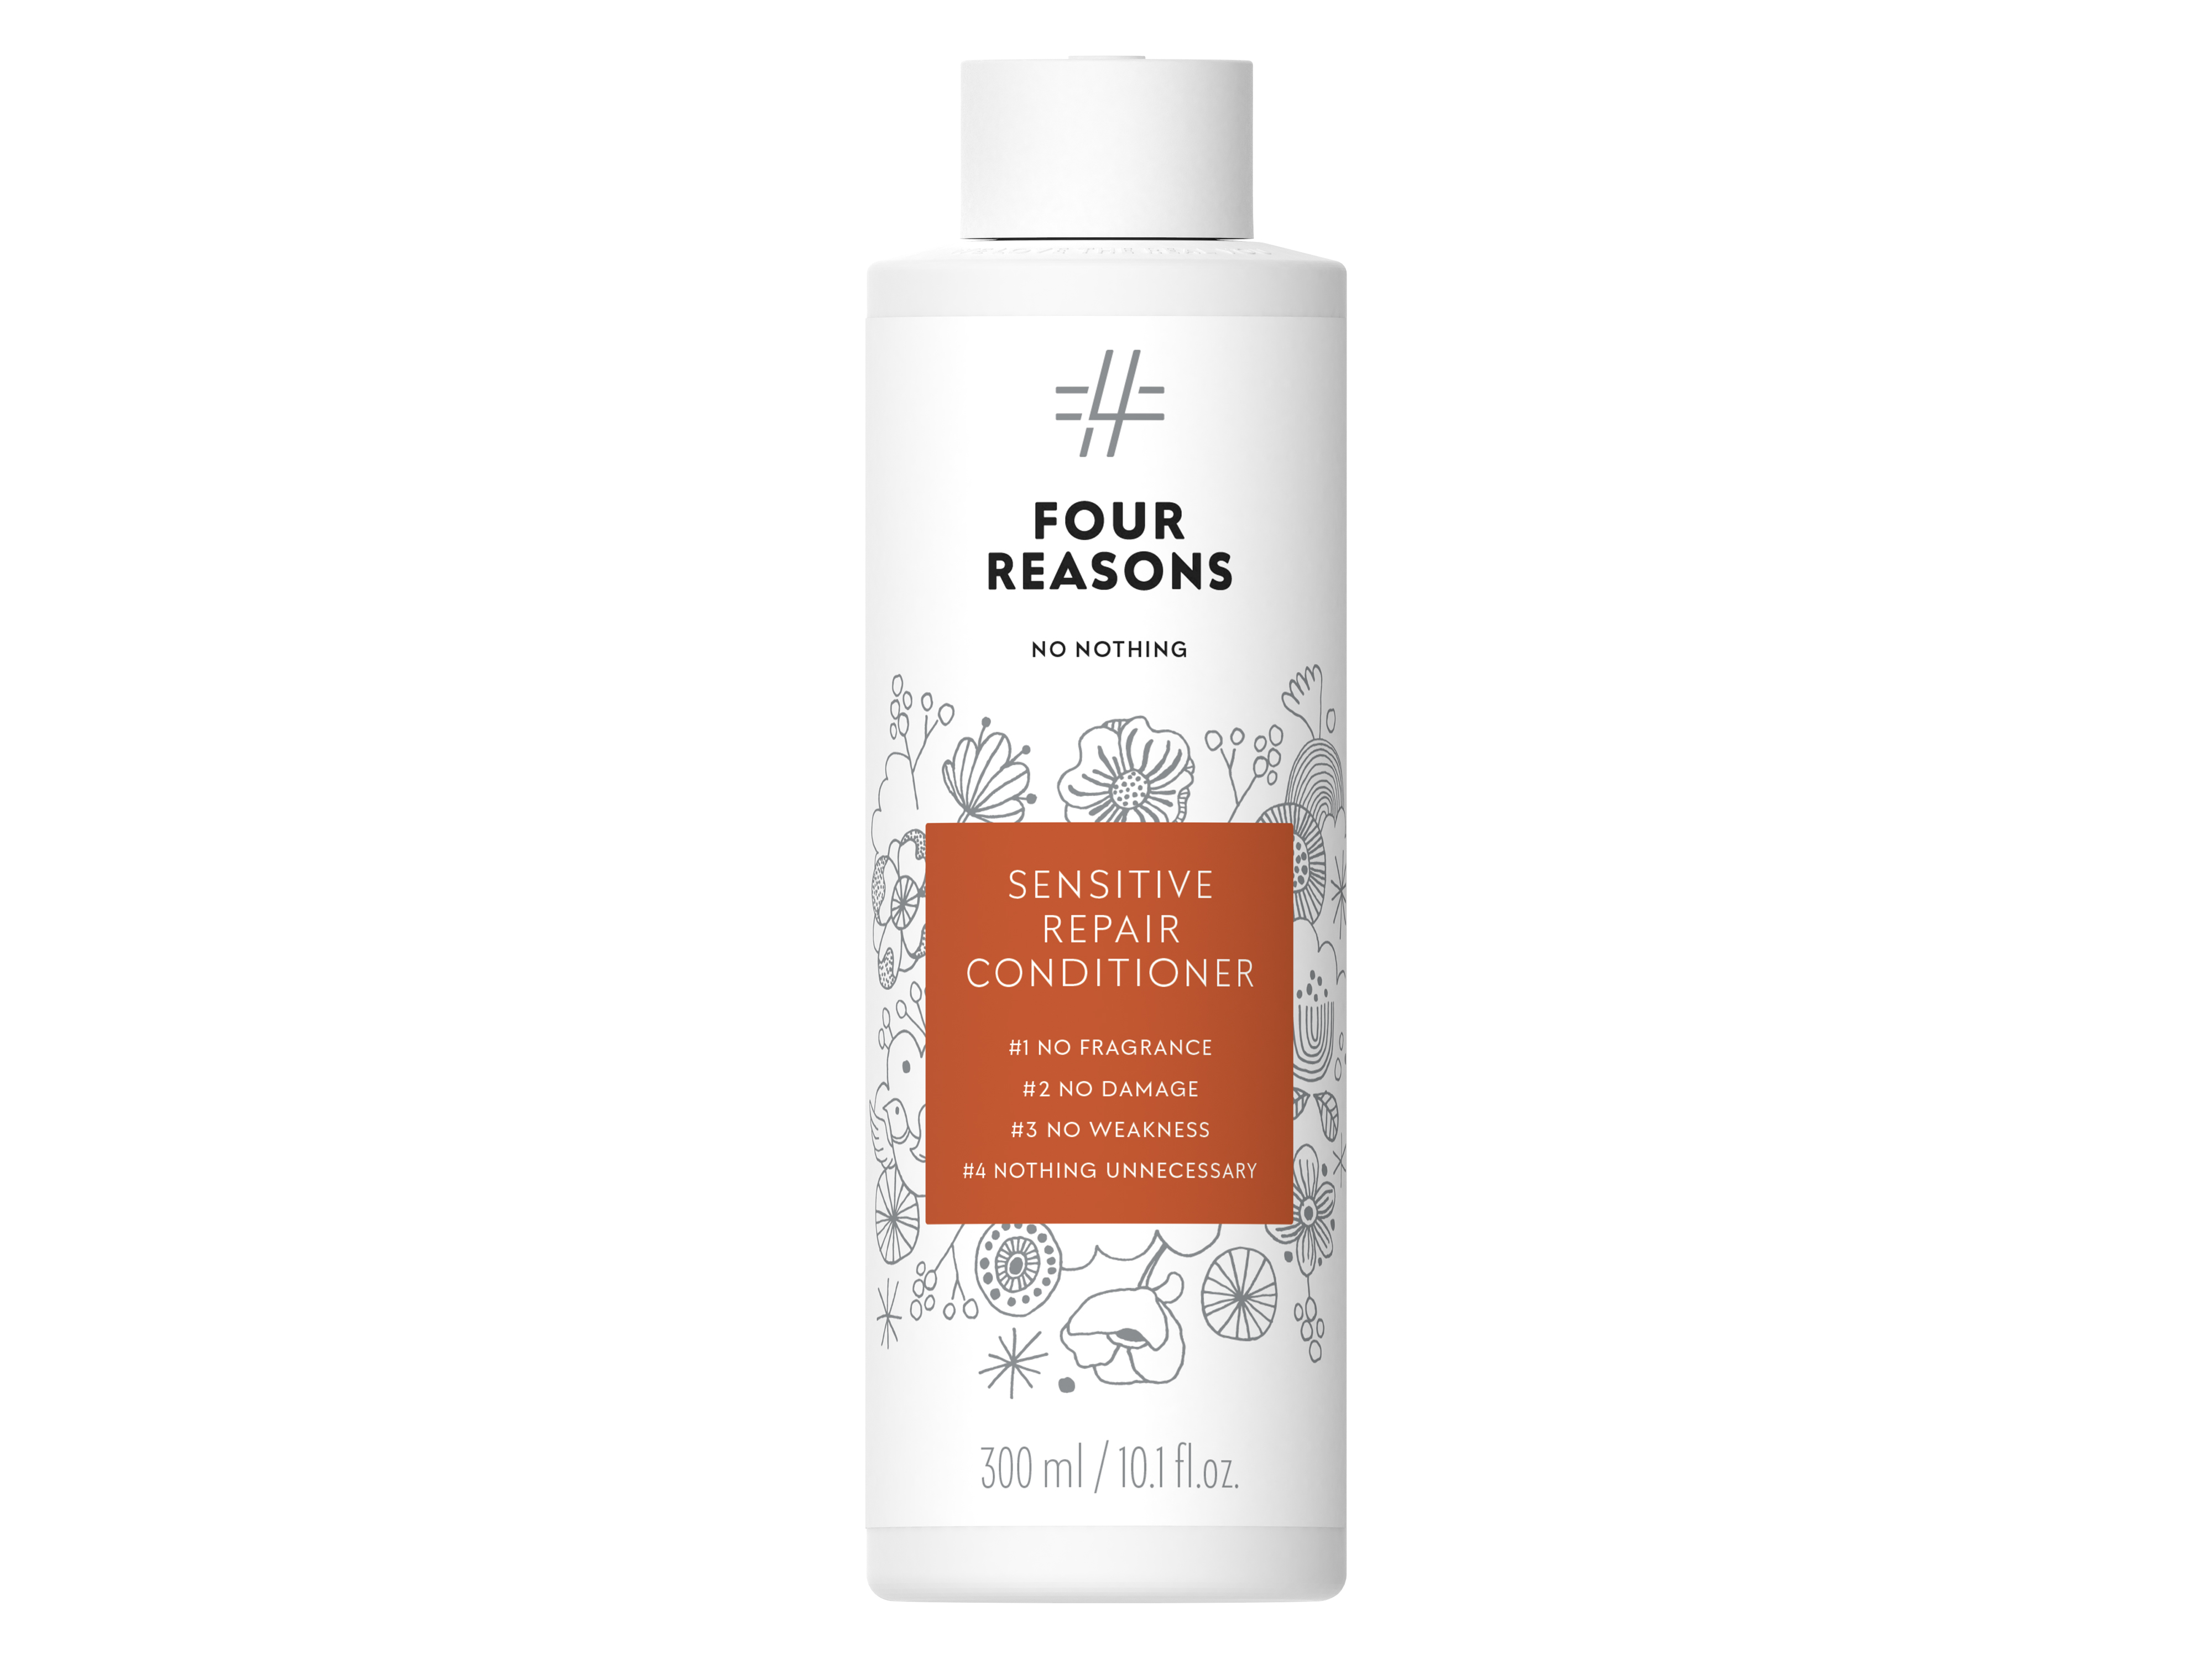 Four Reasons No Nothing Sensitive Repair Conditioner, 300 ml